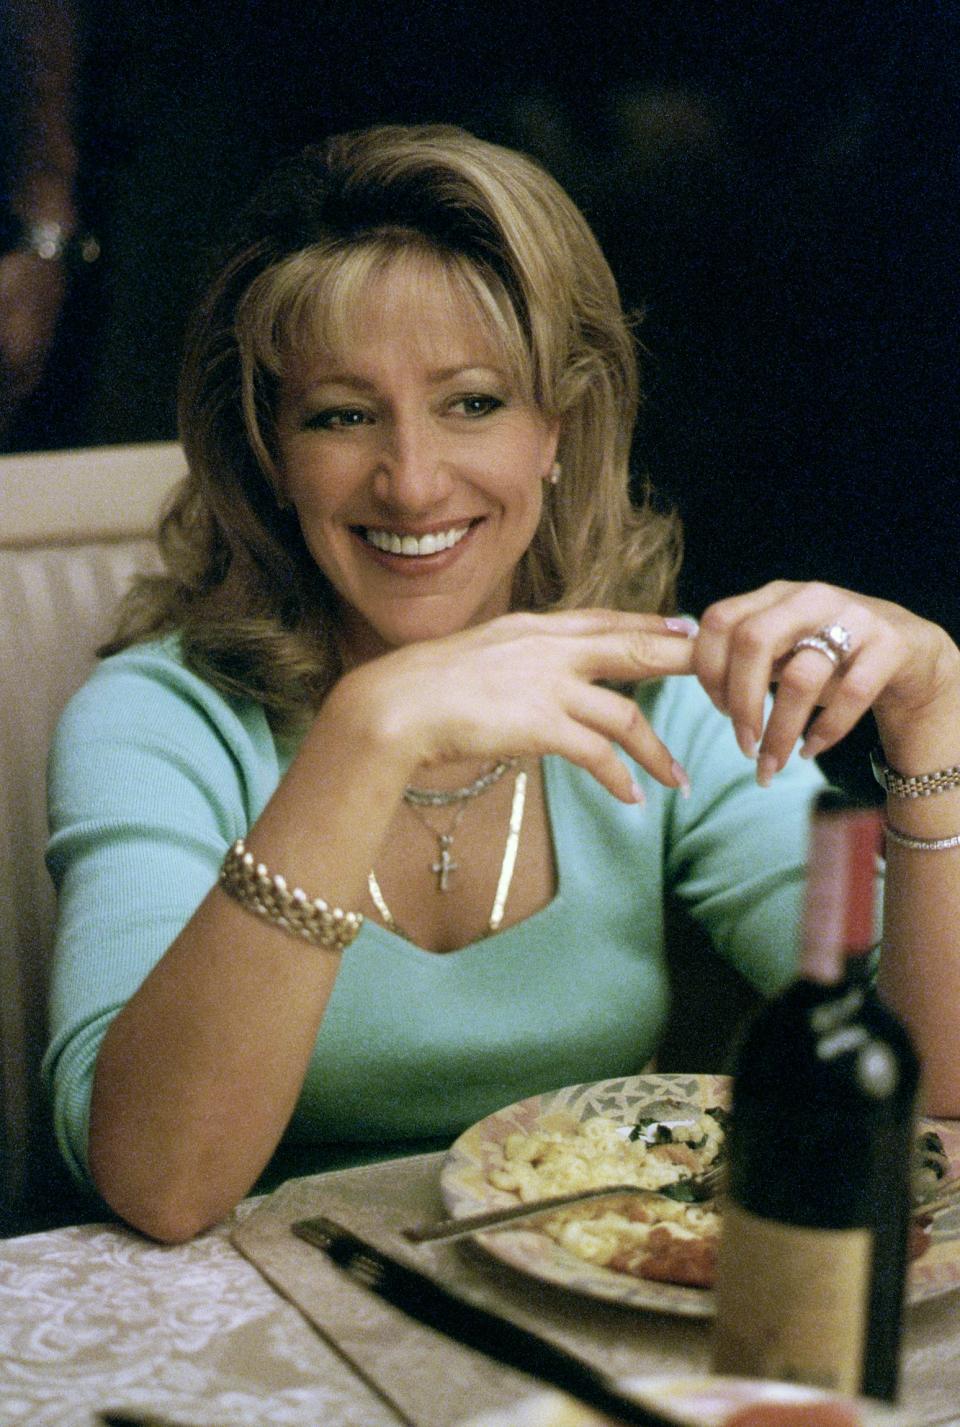 377321 01: The Sopranos, Hbo1S Hit Series About A Modern-Day Mob Boss Caught Between Responsibilities To His Family And His "Family," Debuts New Episodes On Sunday Nights. Pictured: Series Regular Edie Falco.  (Photo By Getty Images)